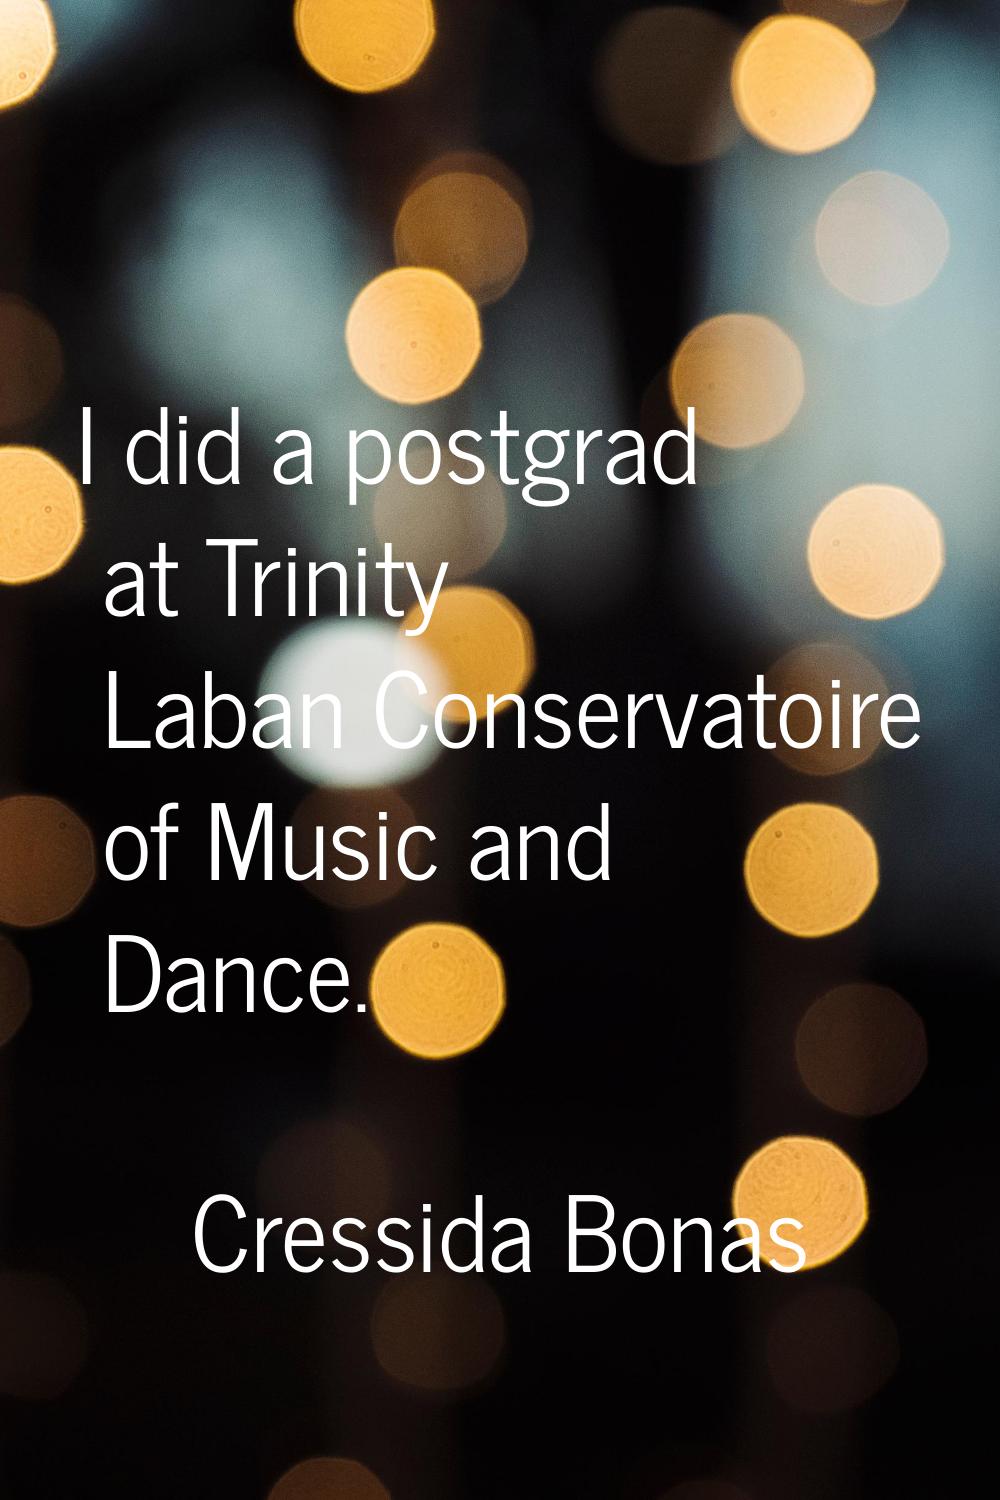 I did a postgrad at Trinity Laban Conservatoire of Music and Dance.